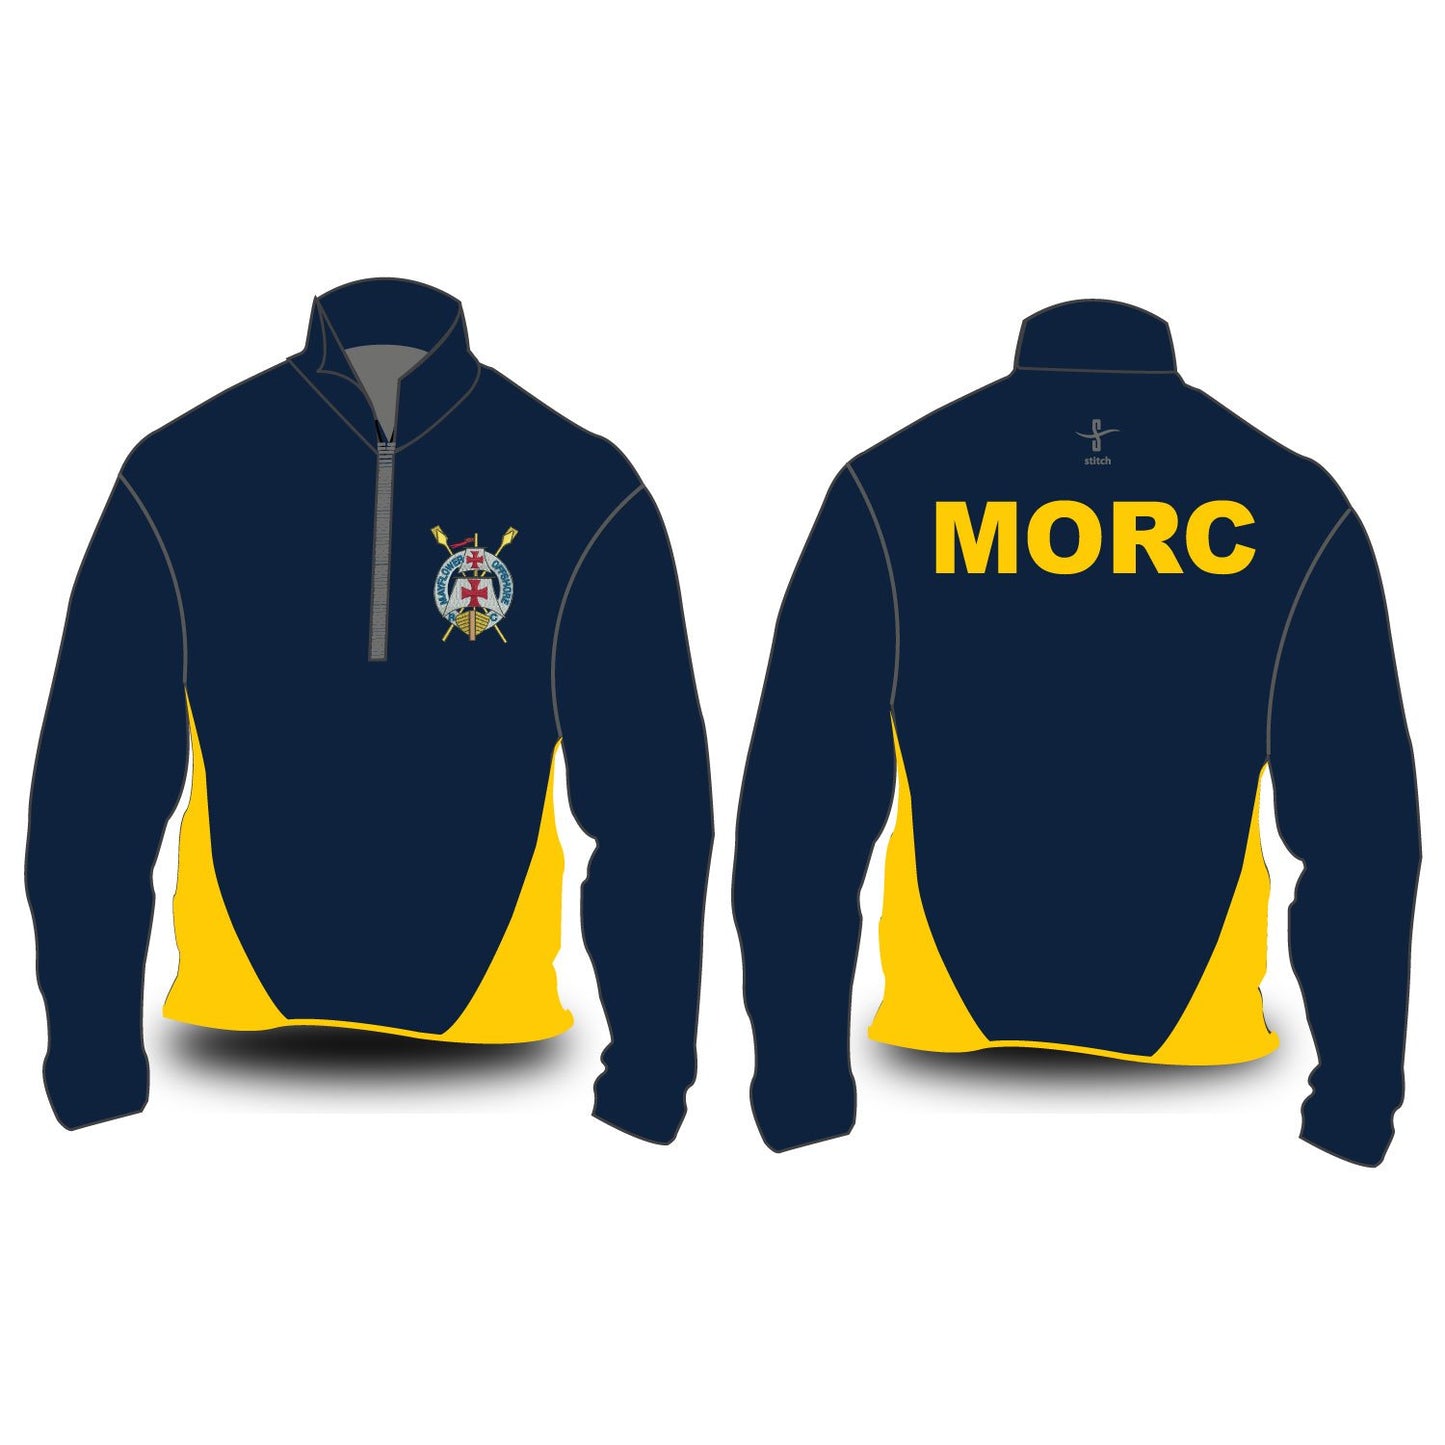 Mayflower Offshore Rowing Club 24-7 Jacket